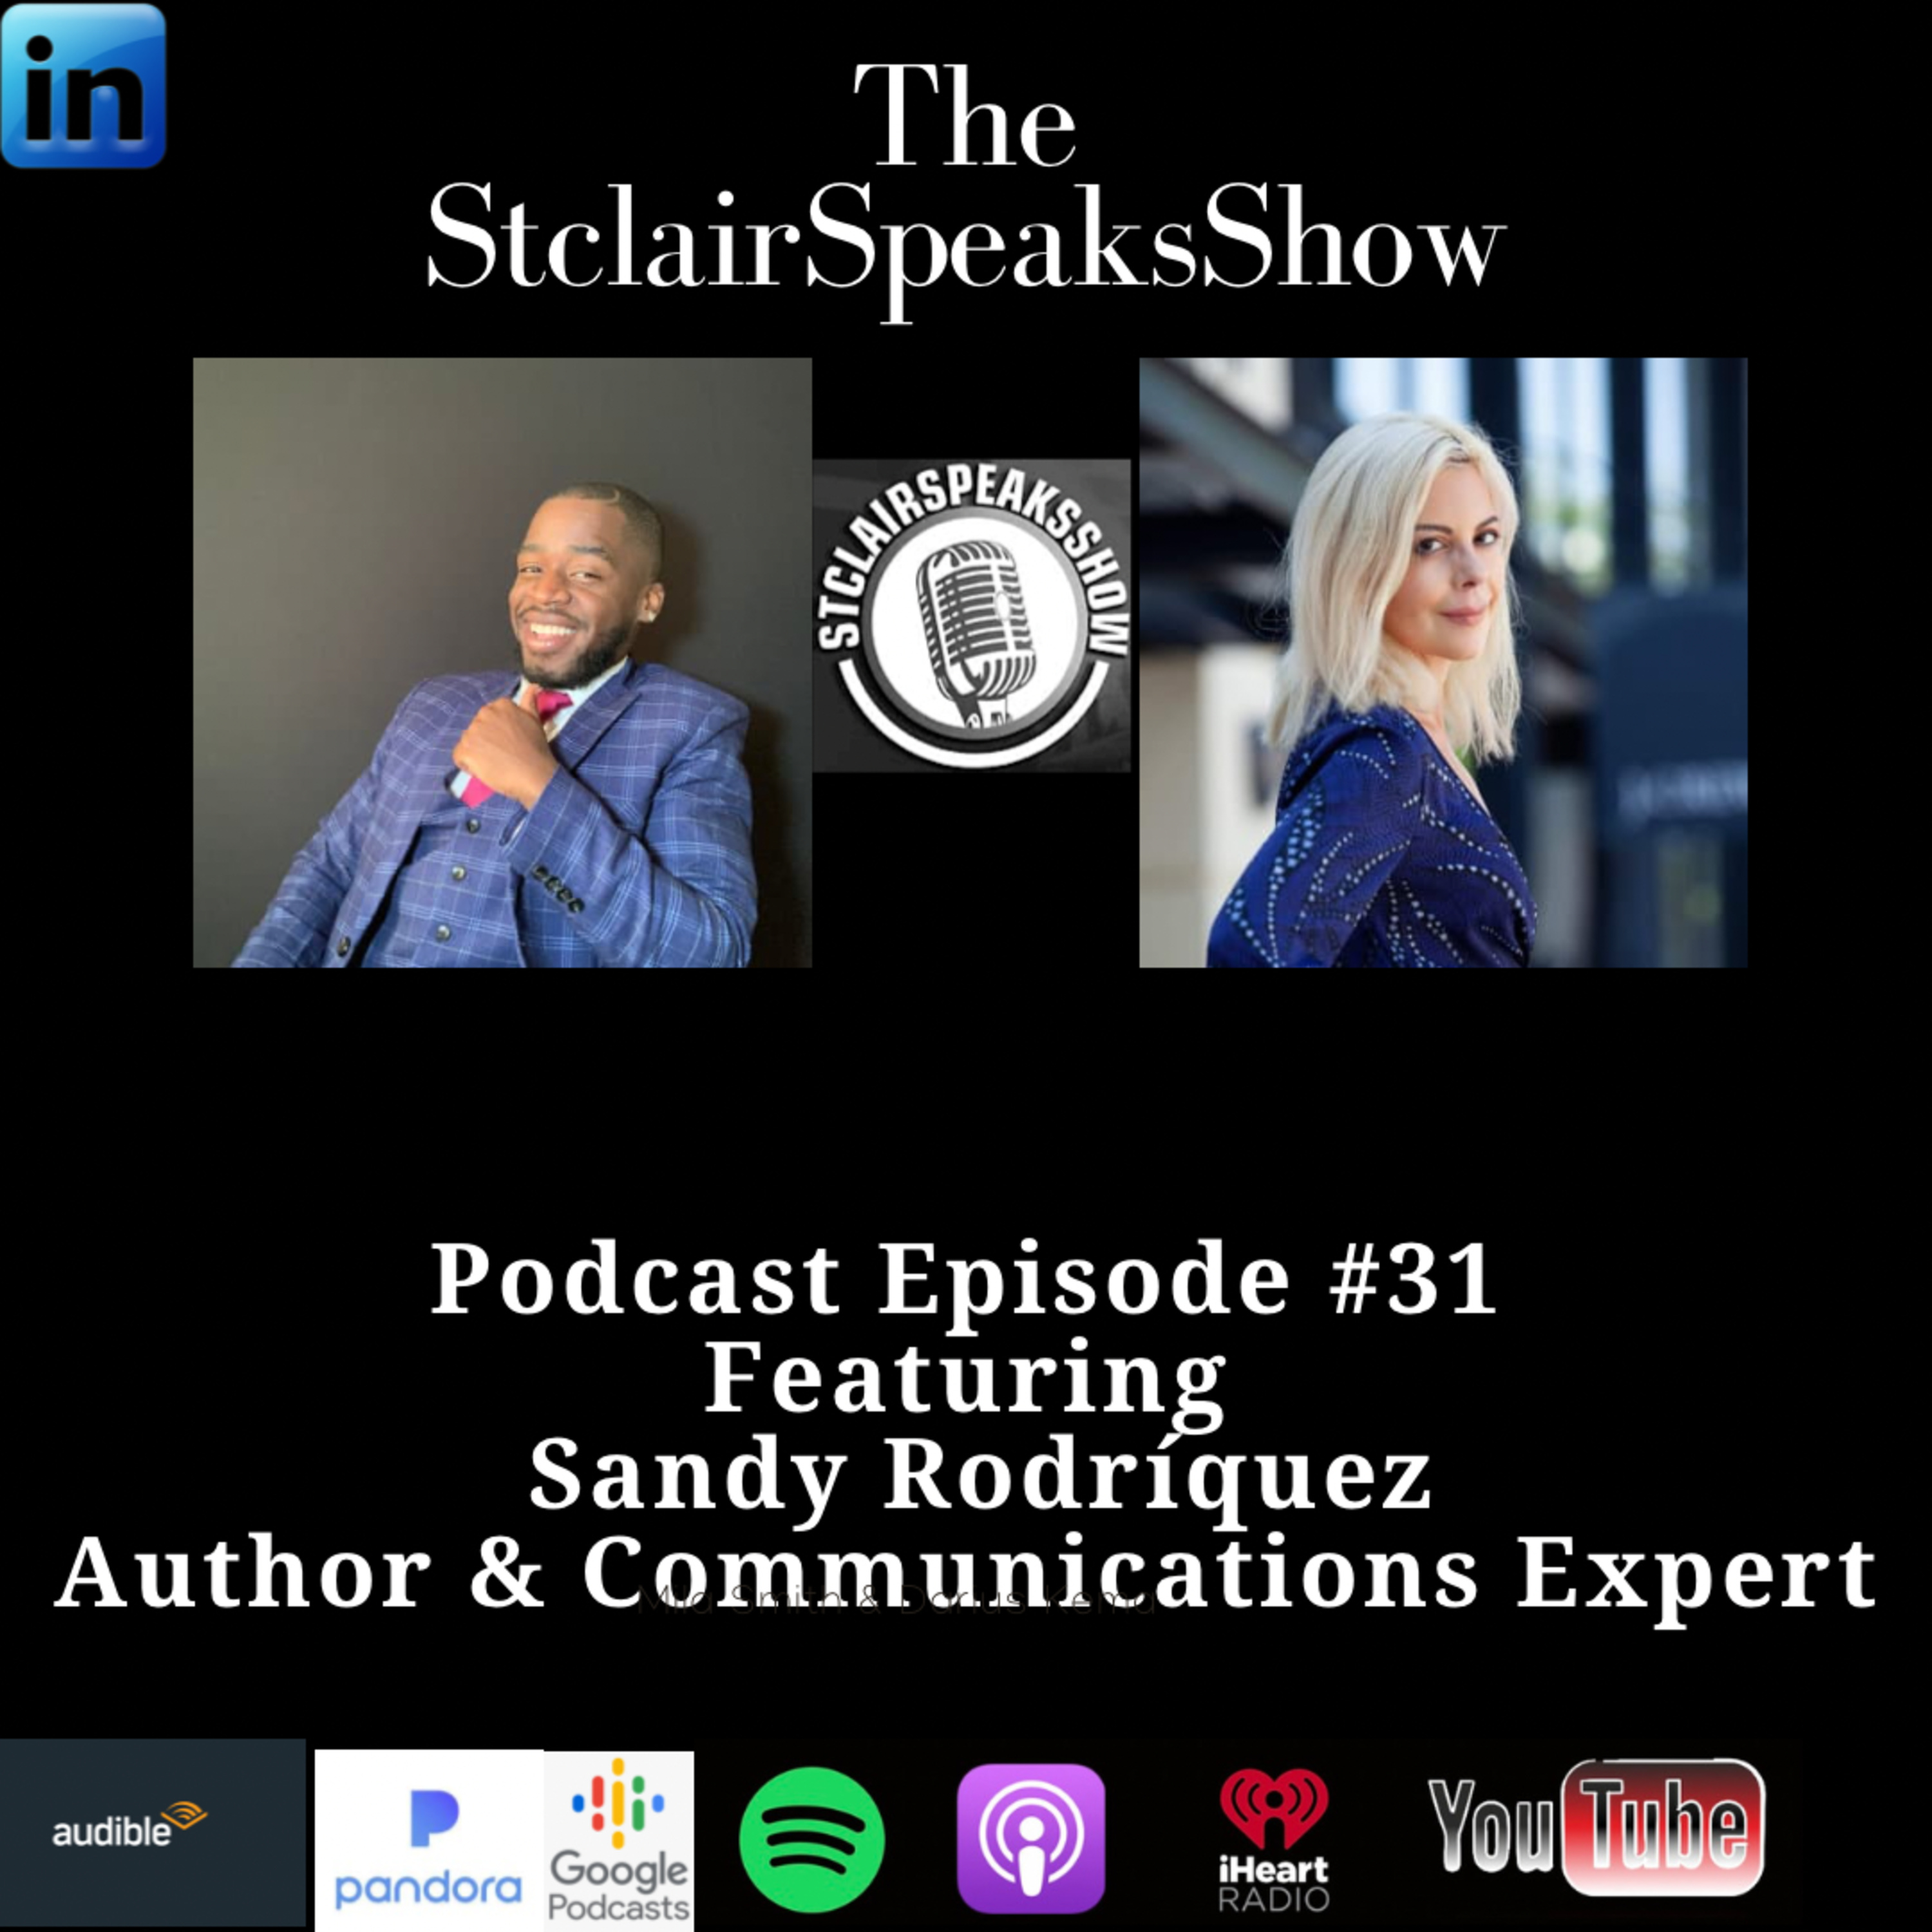 The StclairSpeaksshow Podcast Featuring Sandy Rodriguez Author & Communications Expert Ep #31